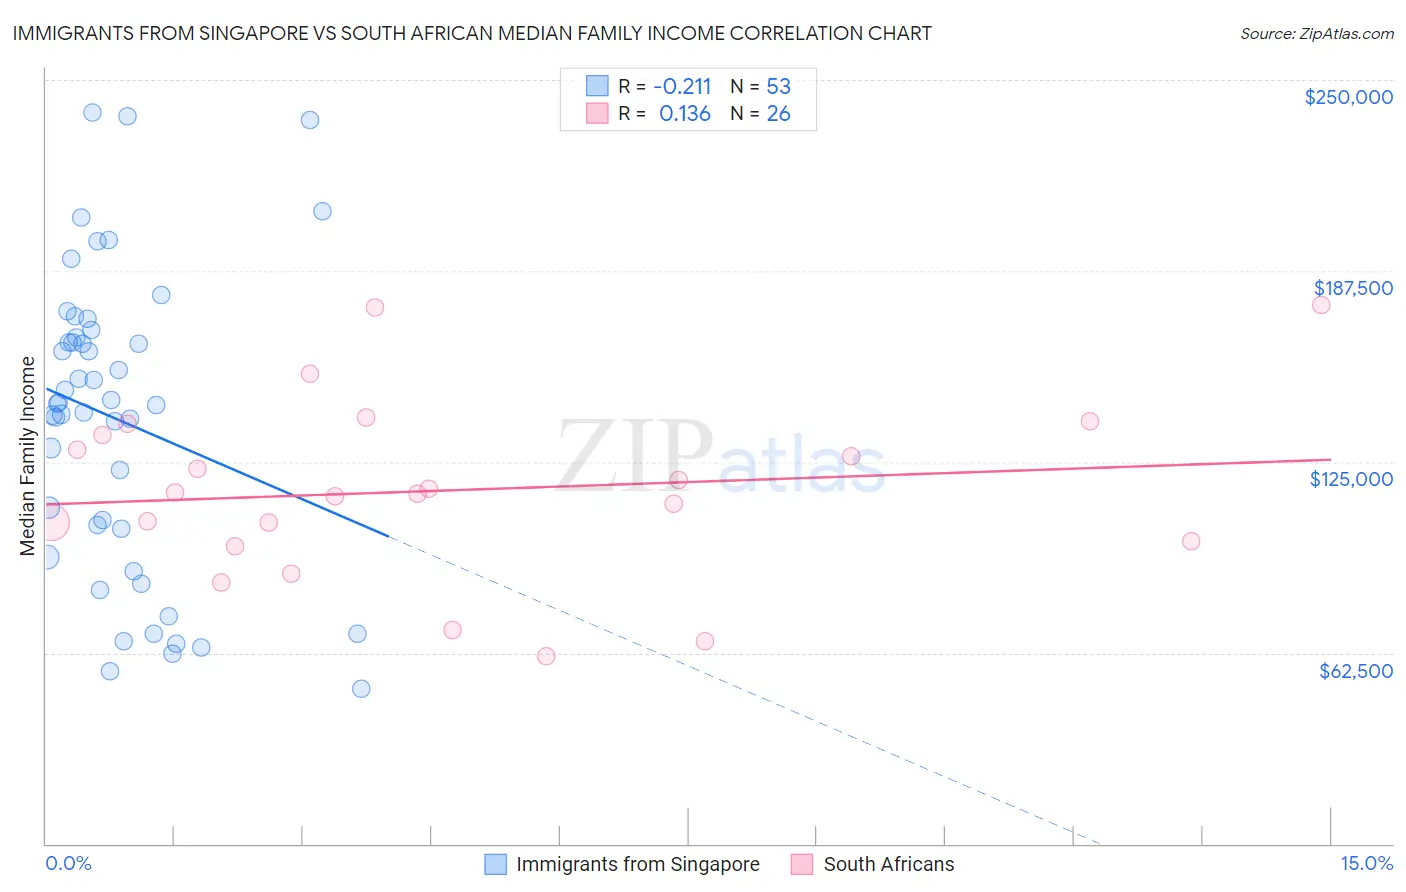 Immigrants from Singapore vs South African Median Family Income